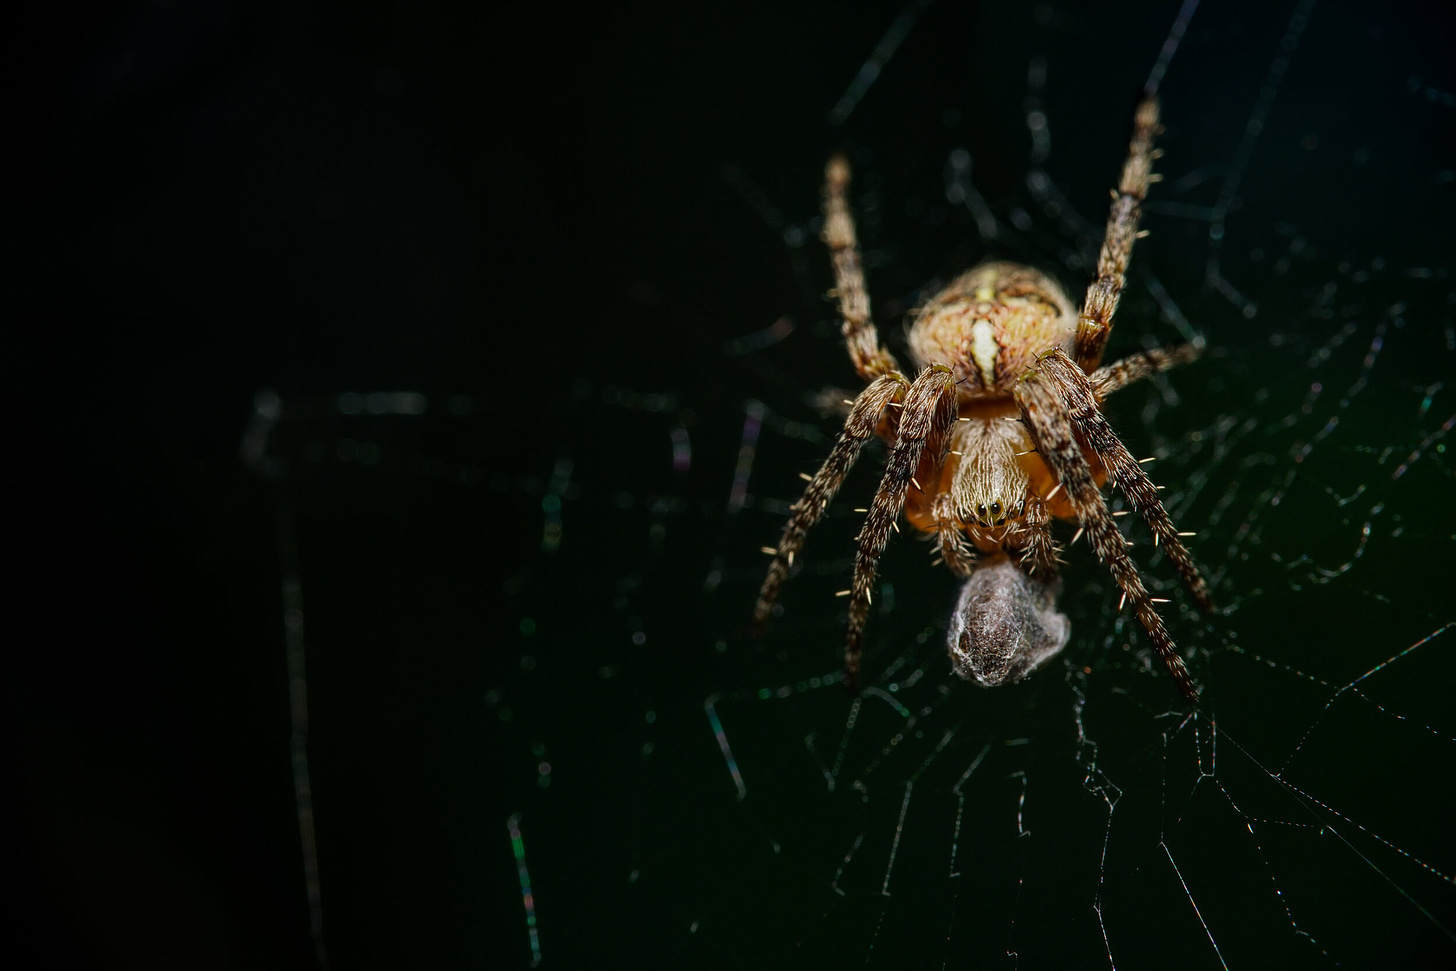 A Female Cross Orb Weaver Spider, Araneus Diadematus, eating an unidentified insect. These are all over my house. Far uglier things may lurk in your subconscious.